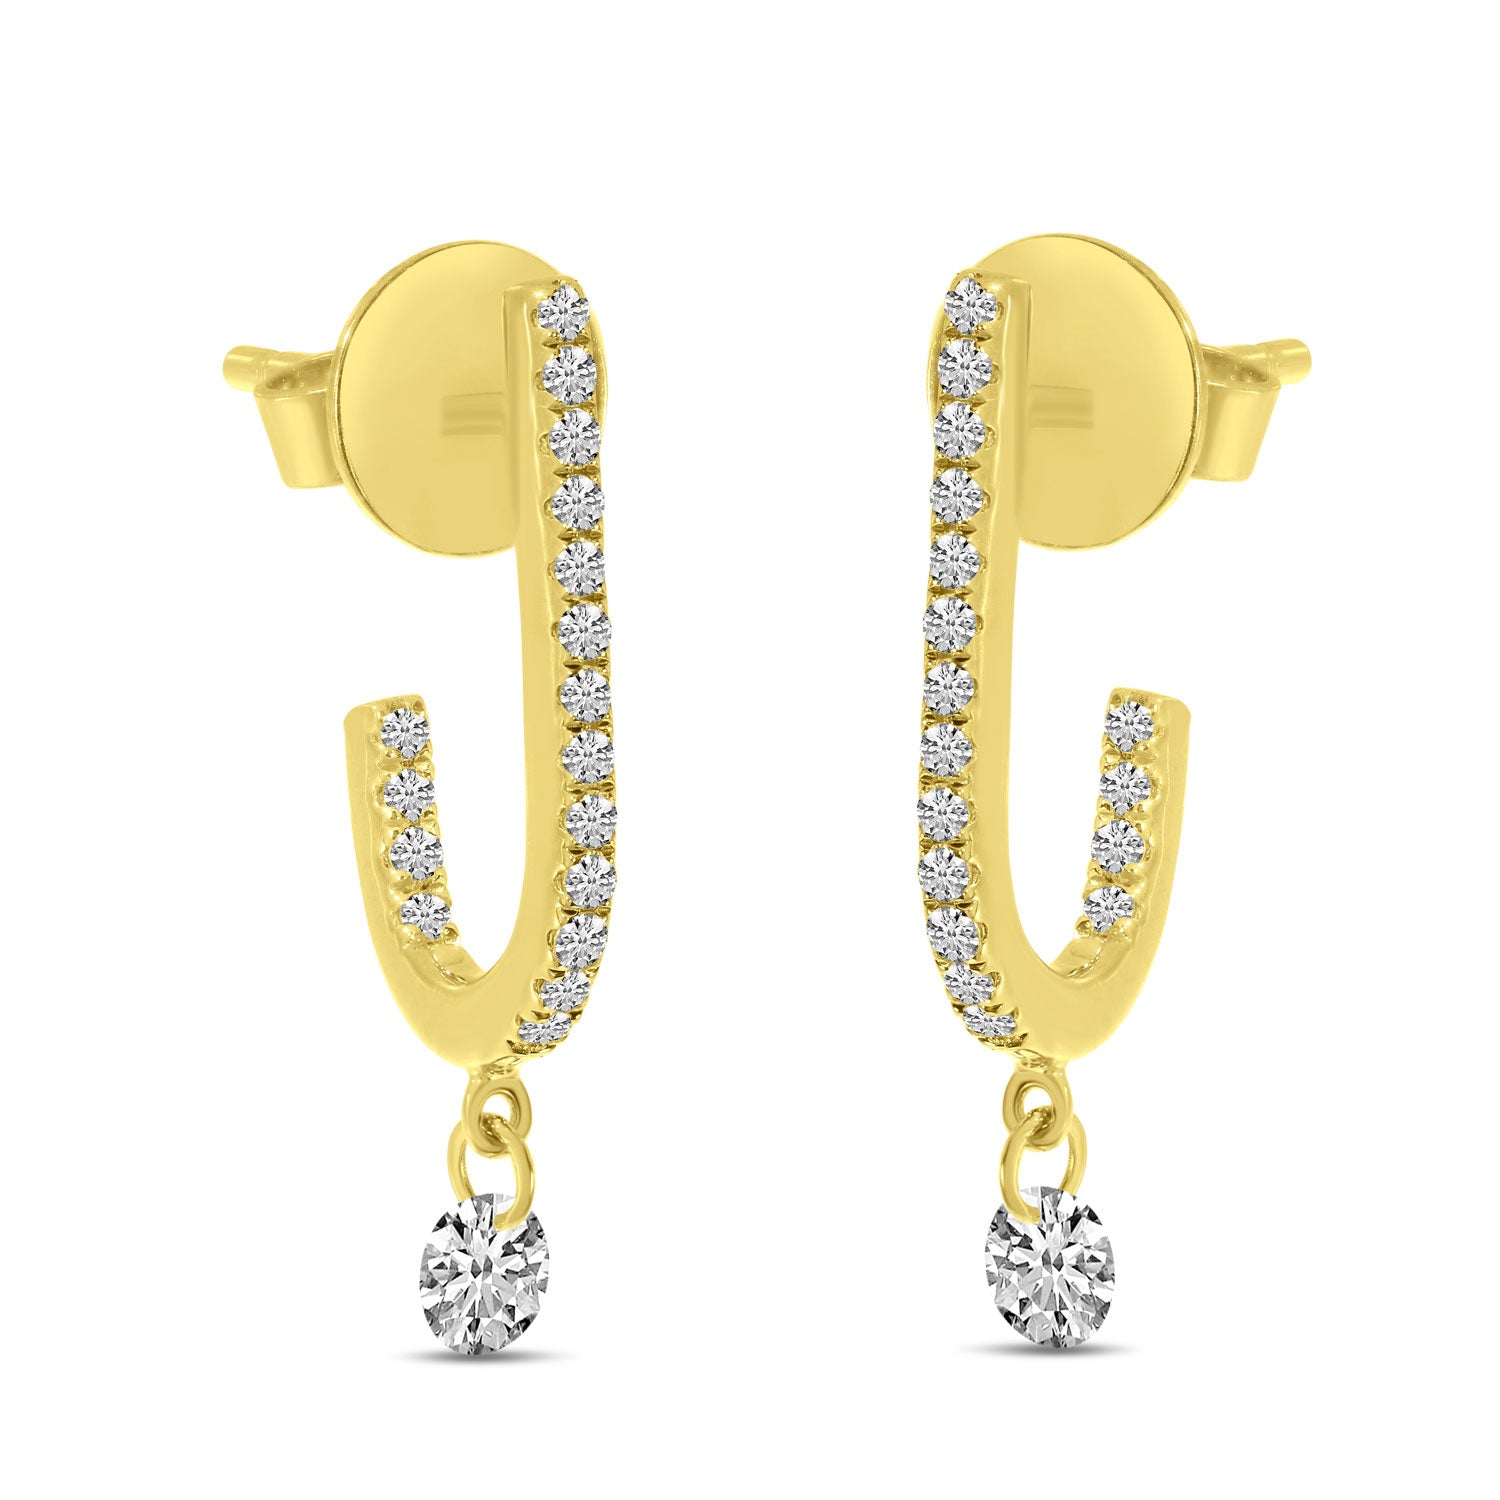 Dazzle with these 14k yellow gold huggie earrings featuring round diamonds and measuring 18.5mm long. Enjoy security and comfort with the friction back closures!